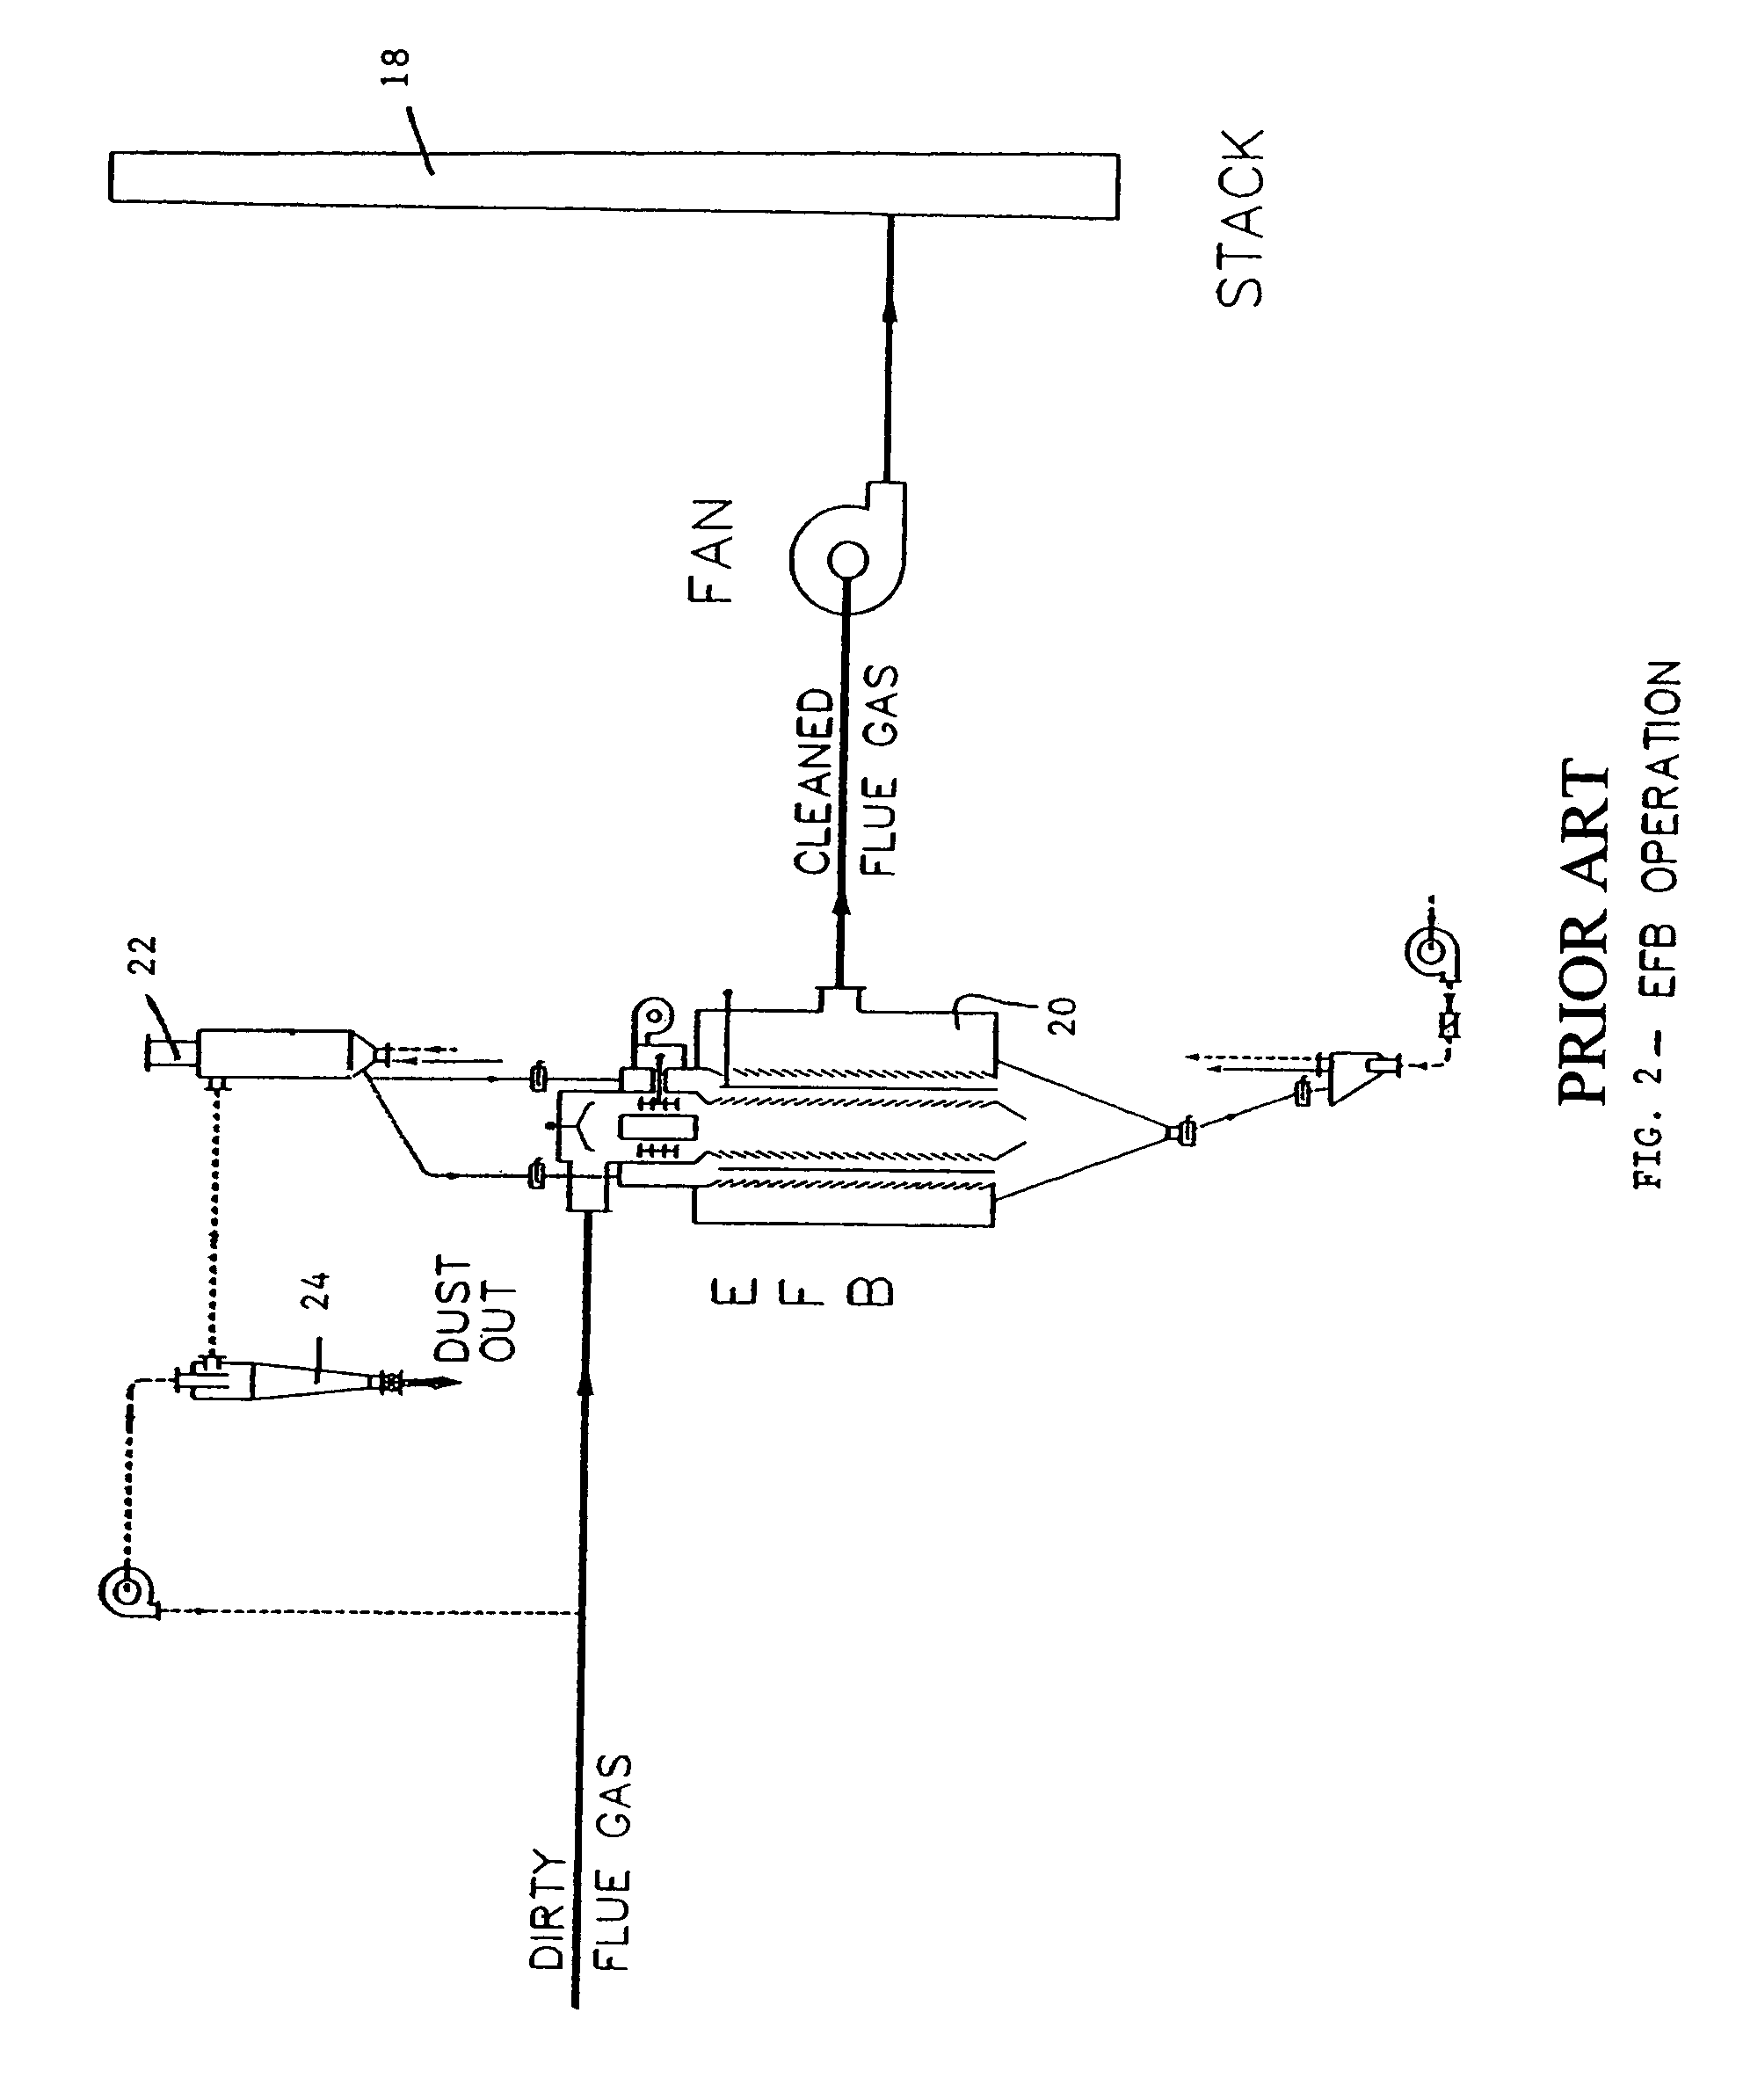 Apparatus and method using an electrified filter bed for removal of pollutants from a flue gas stream